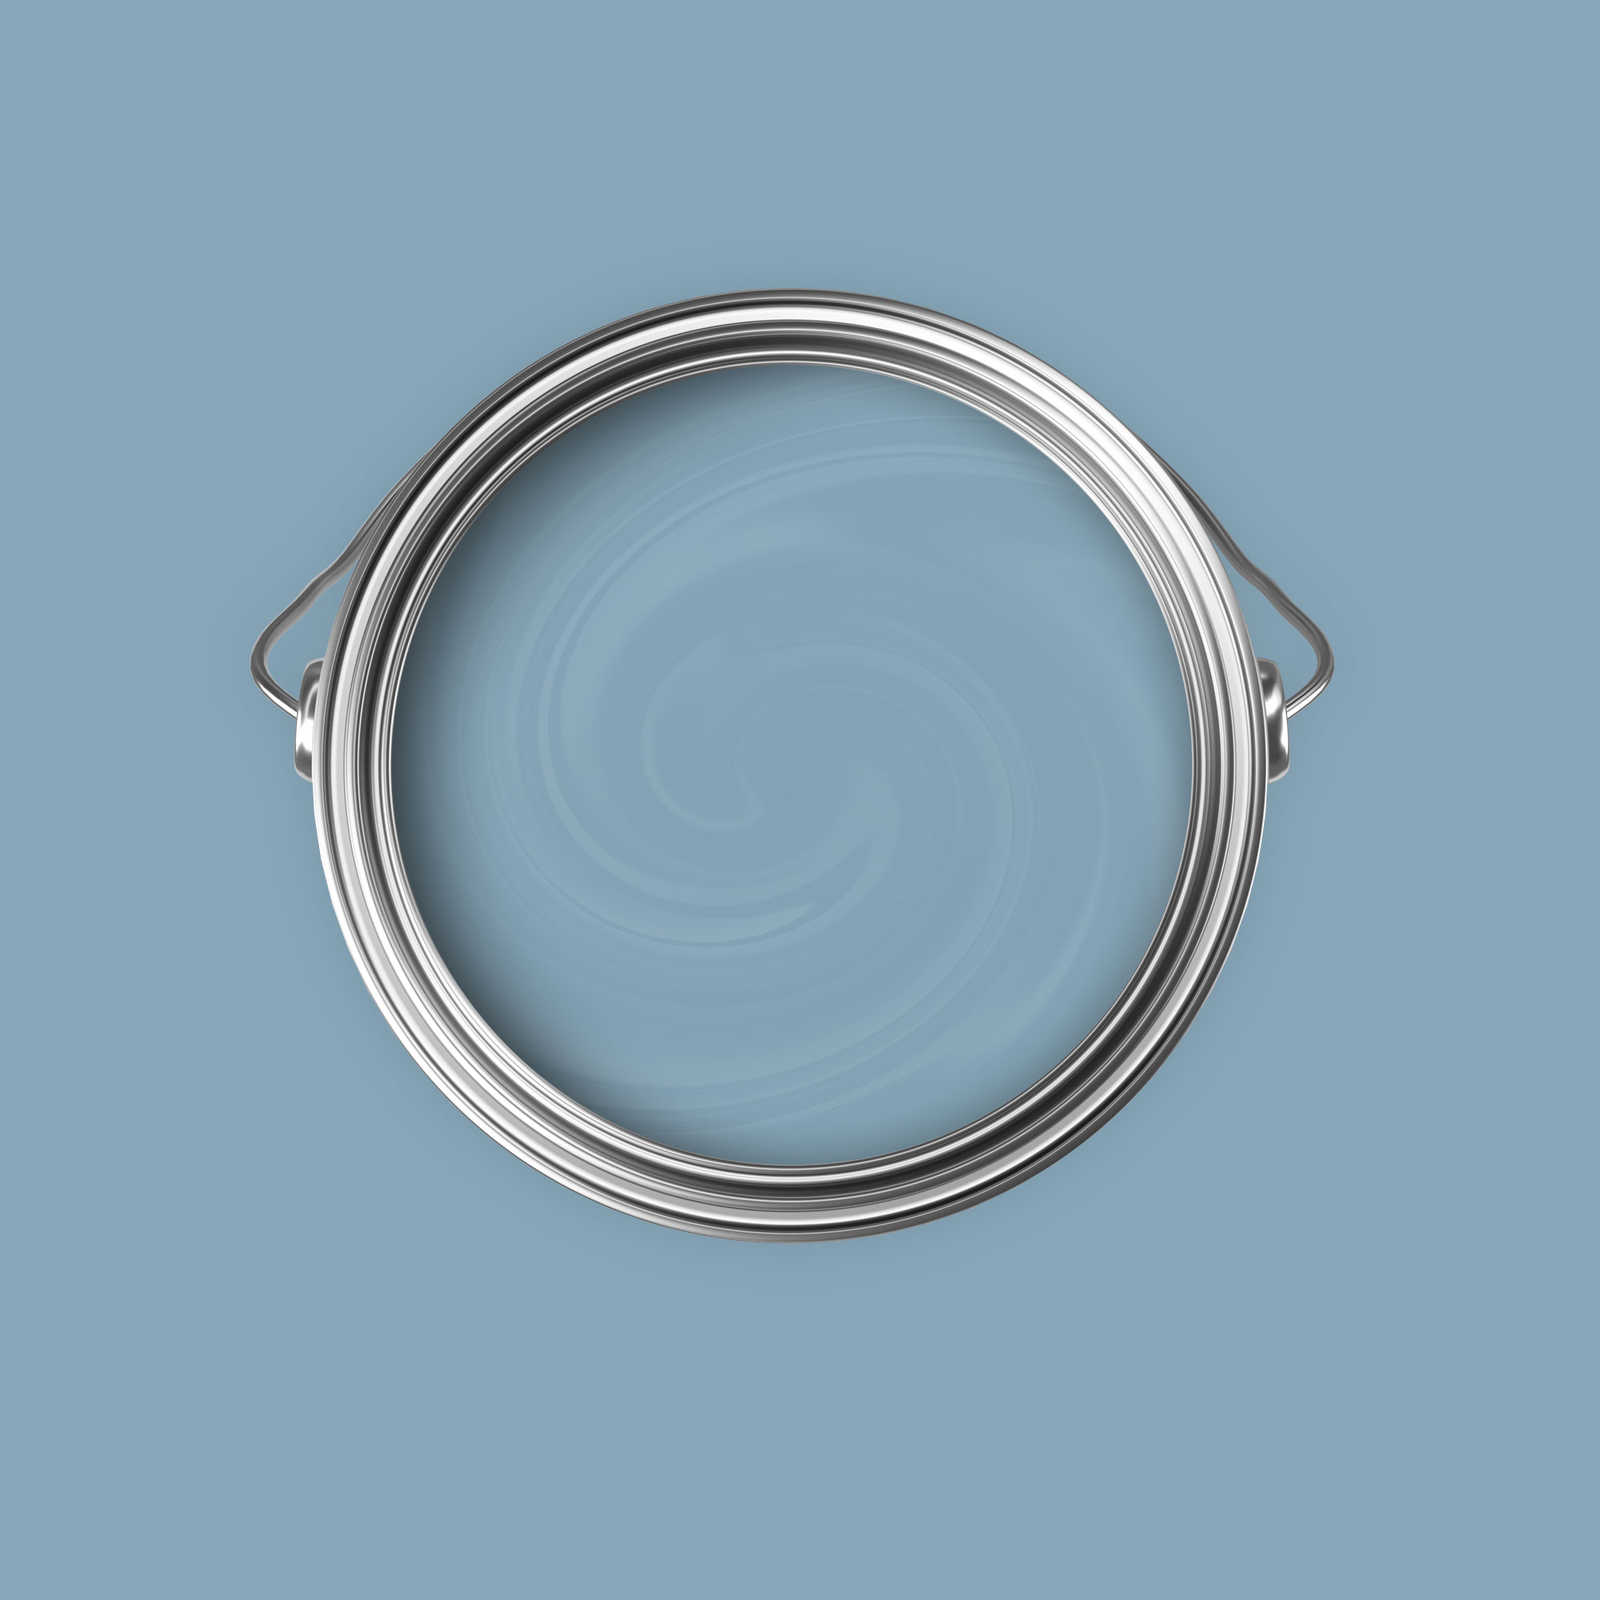             Premium Wall Paint Serene Nordic Blue »Blissful Blue« NW306 – 5 litre
        